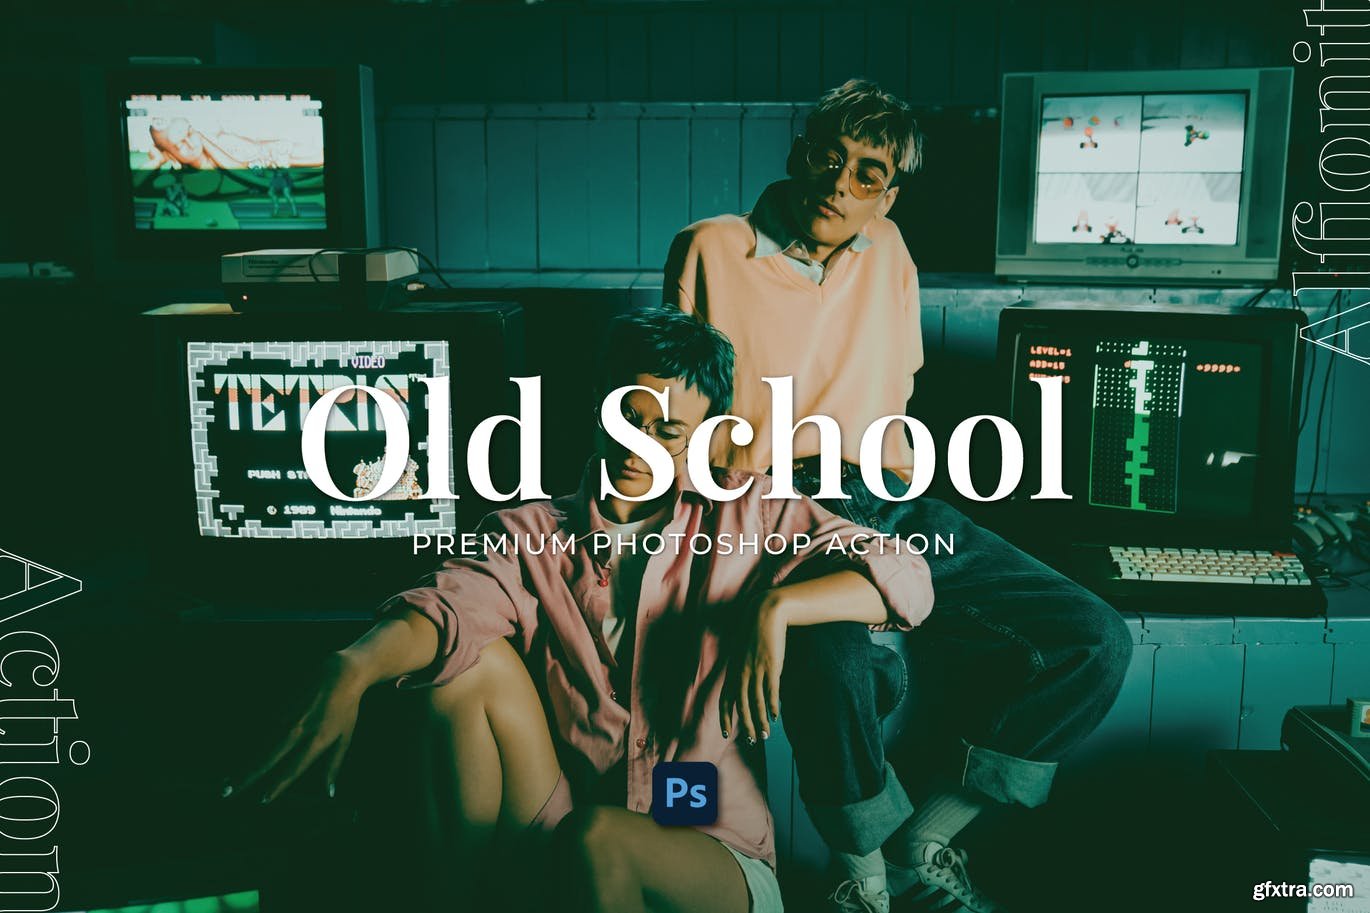 Old School Photoshop Action » GFxtra